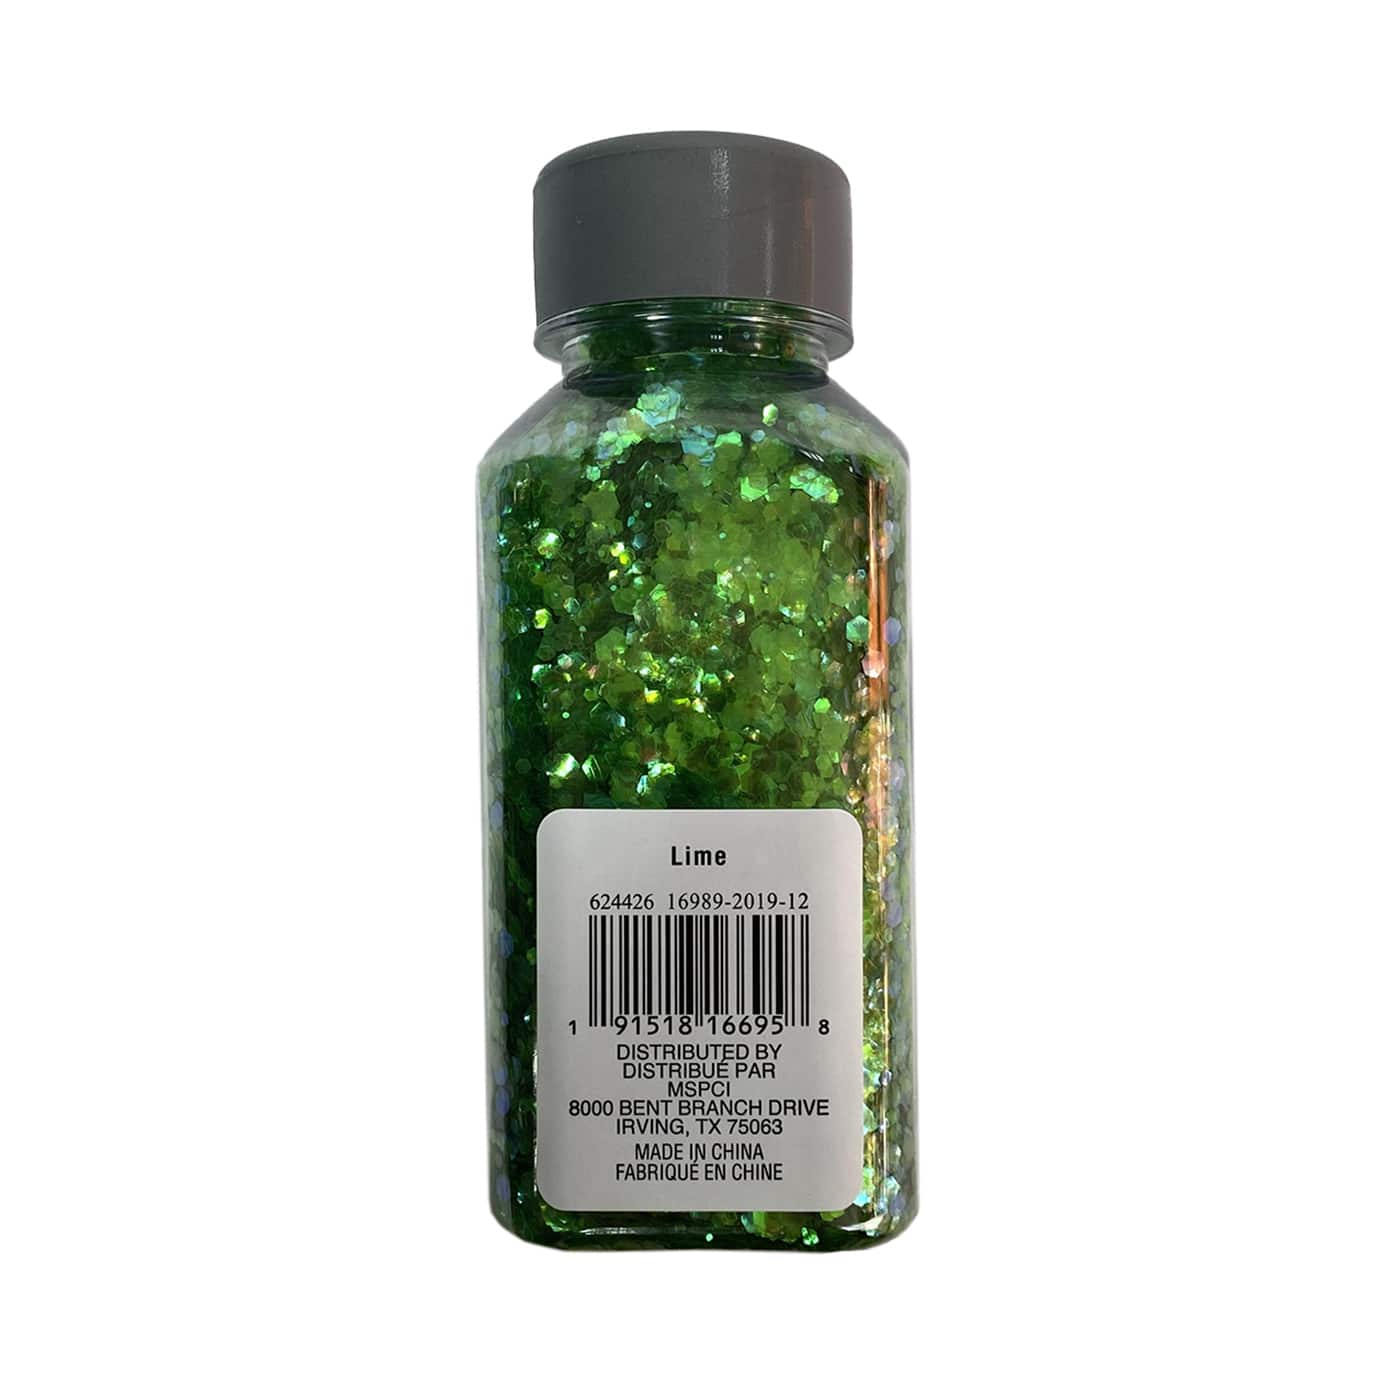 Glitzy Mix Specialty Polyester Glitter by Recollections&#x2122; 